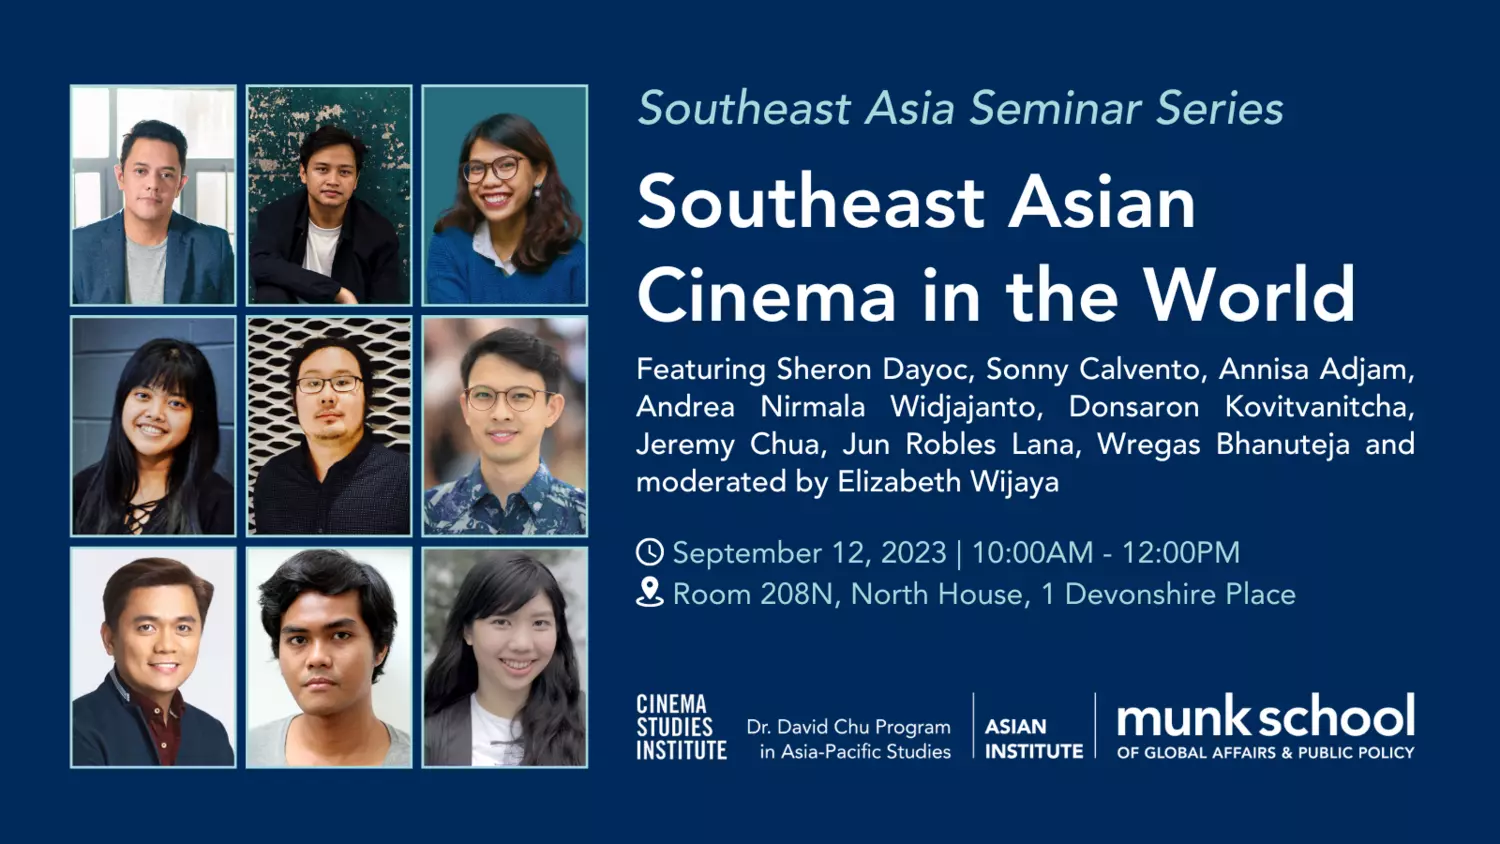 Southeast Asia Seminar Series for September 12th, poster